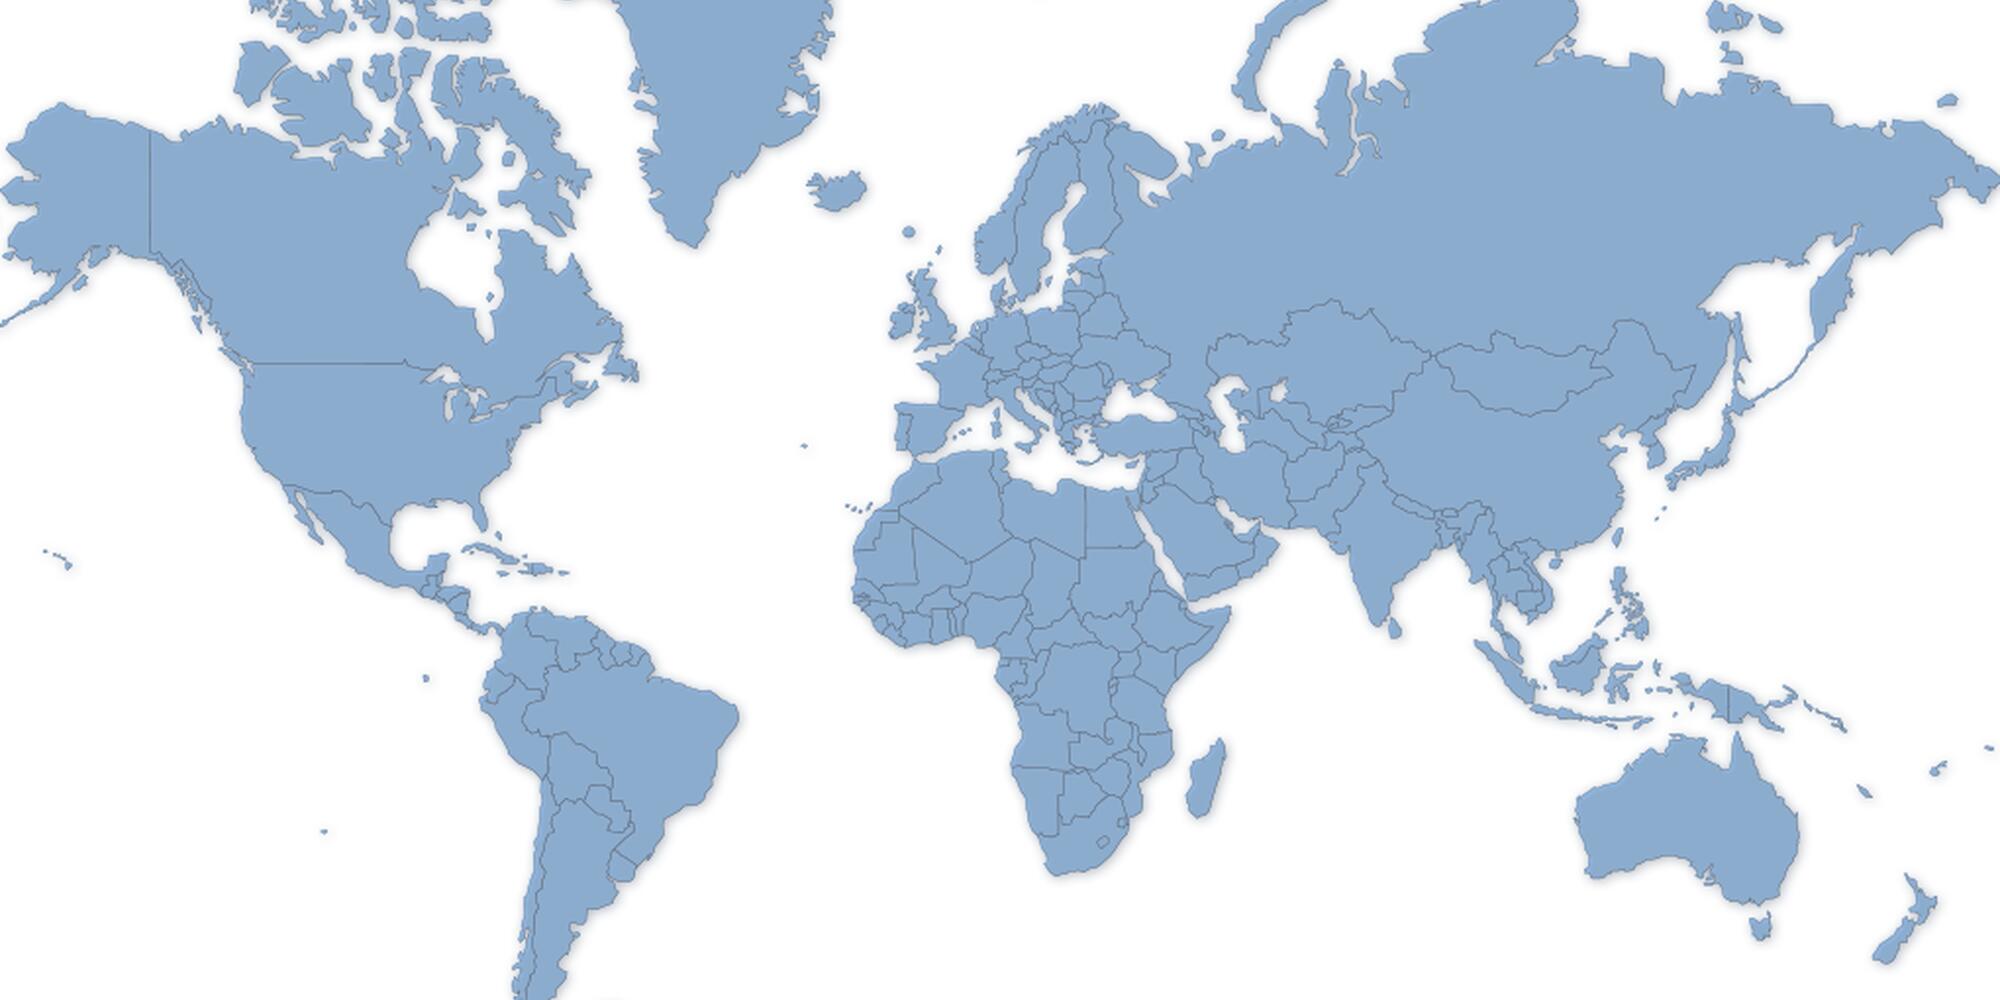 A map of the world, featuring all continents.